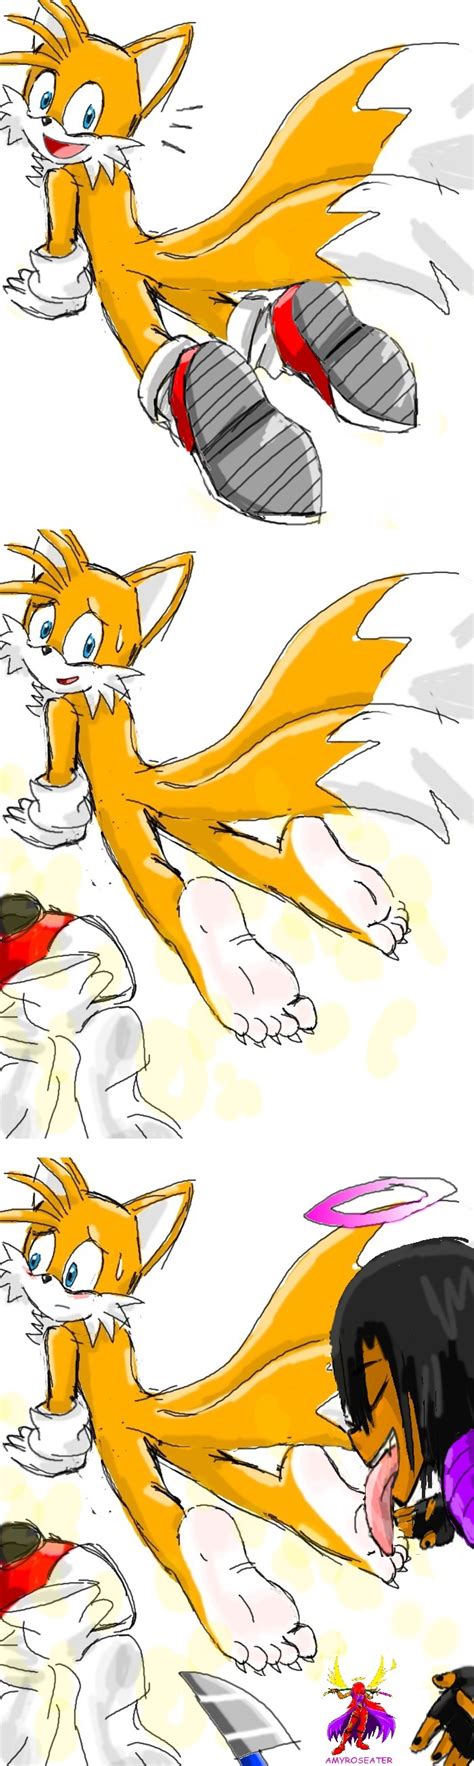 Tails Stinky Feet Licked by amyroseater on DeviantArt.